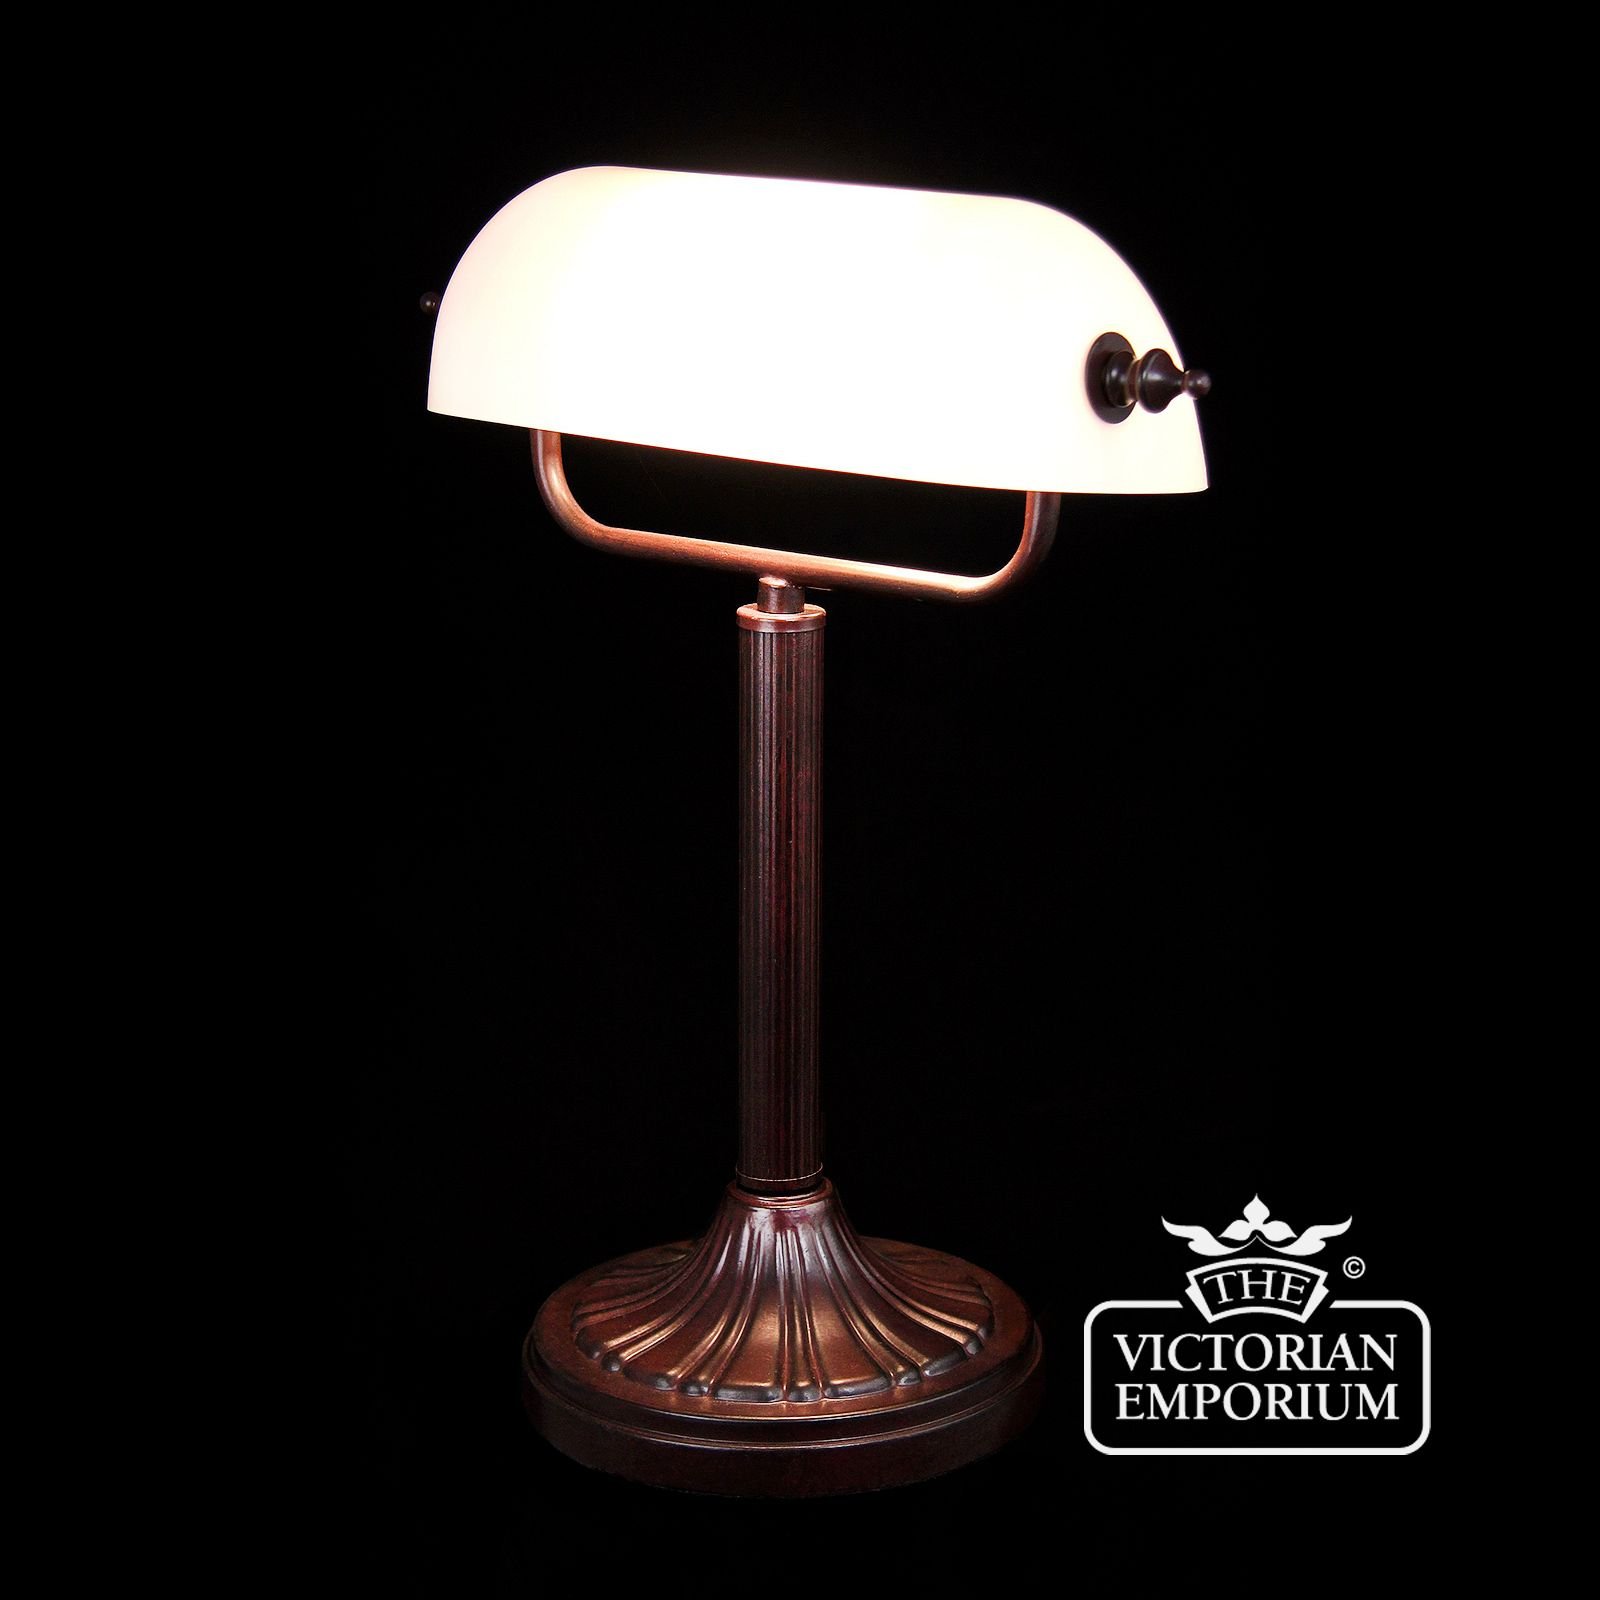 The green desk lamp that appears in every movie - The Bankers Lamp